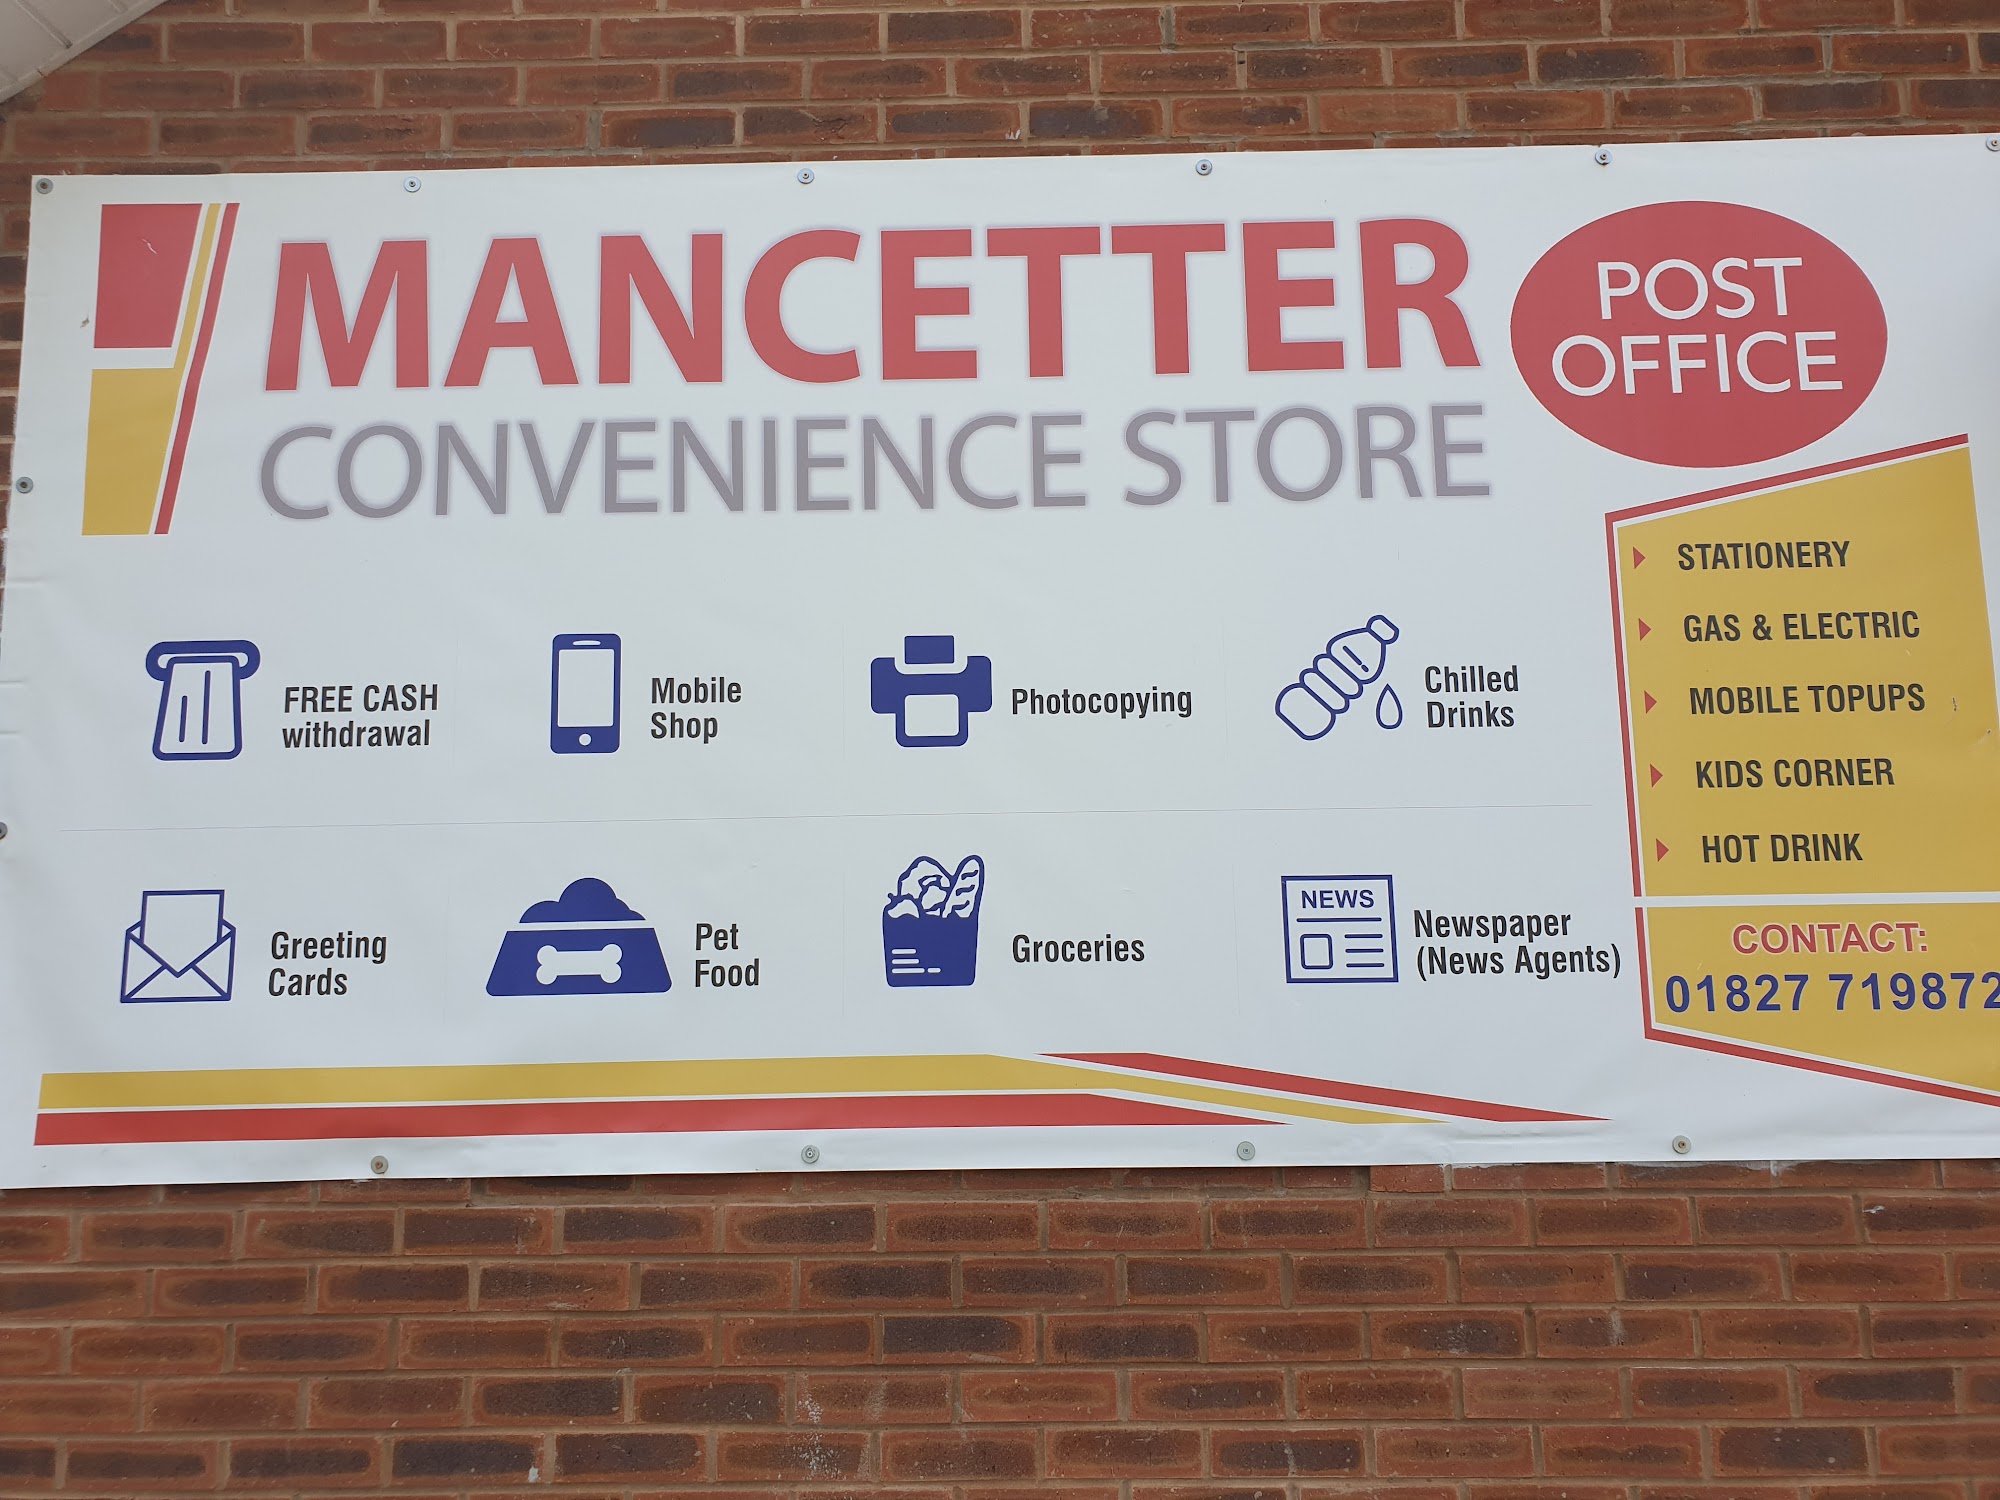 Mancetter Post Office and Mobile Shop